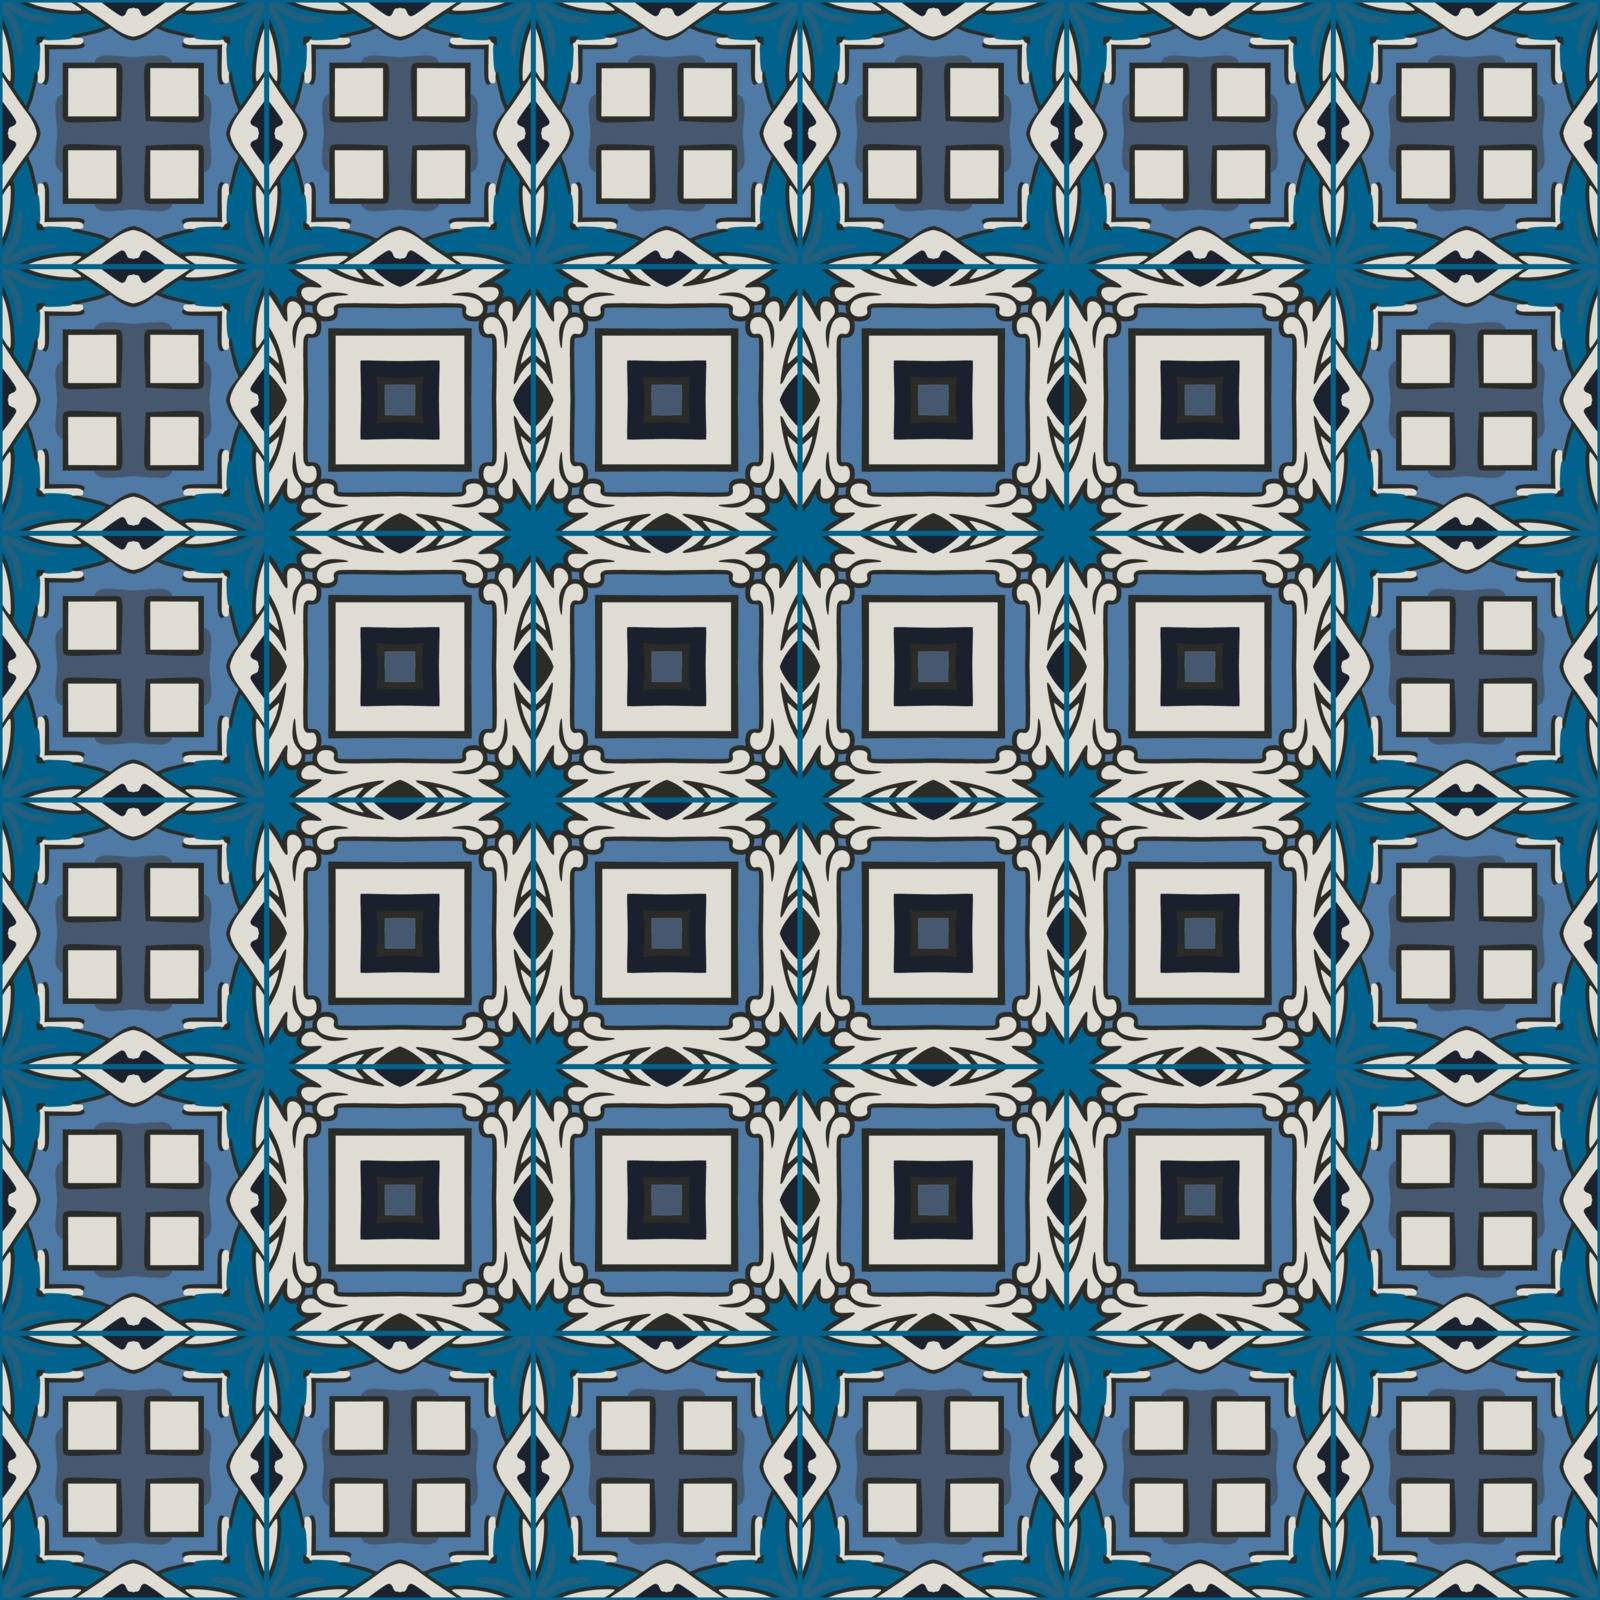 Seamless pattern illustration in traditional style - inspired by Portuguese tiles
